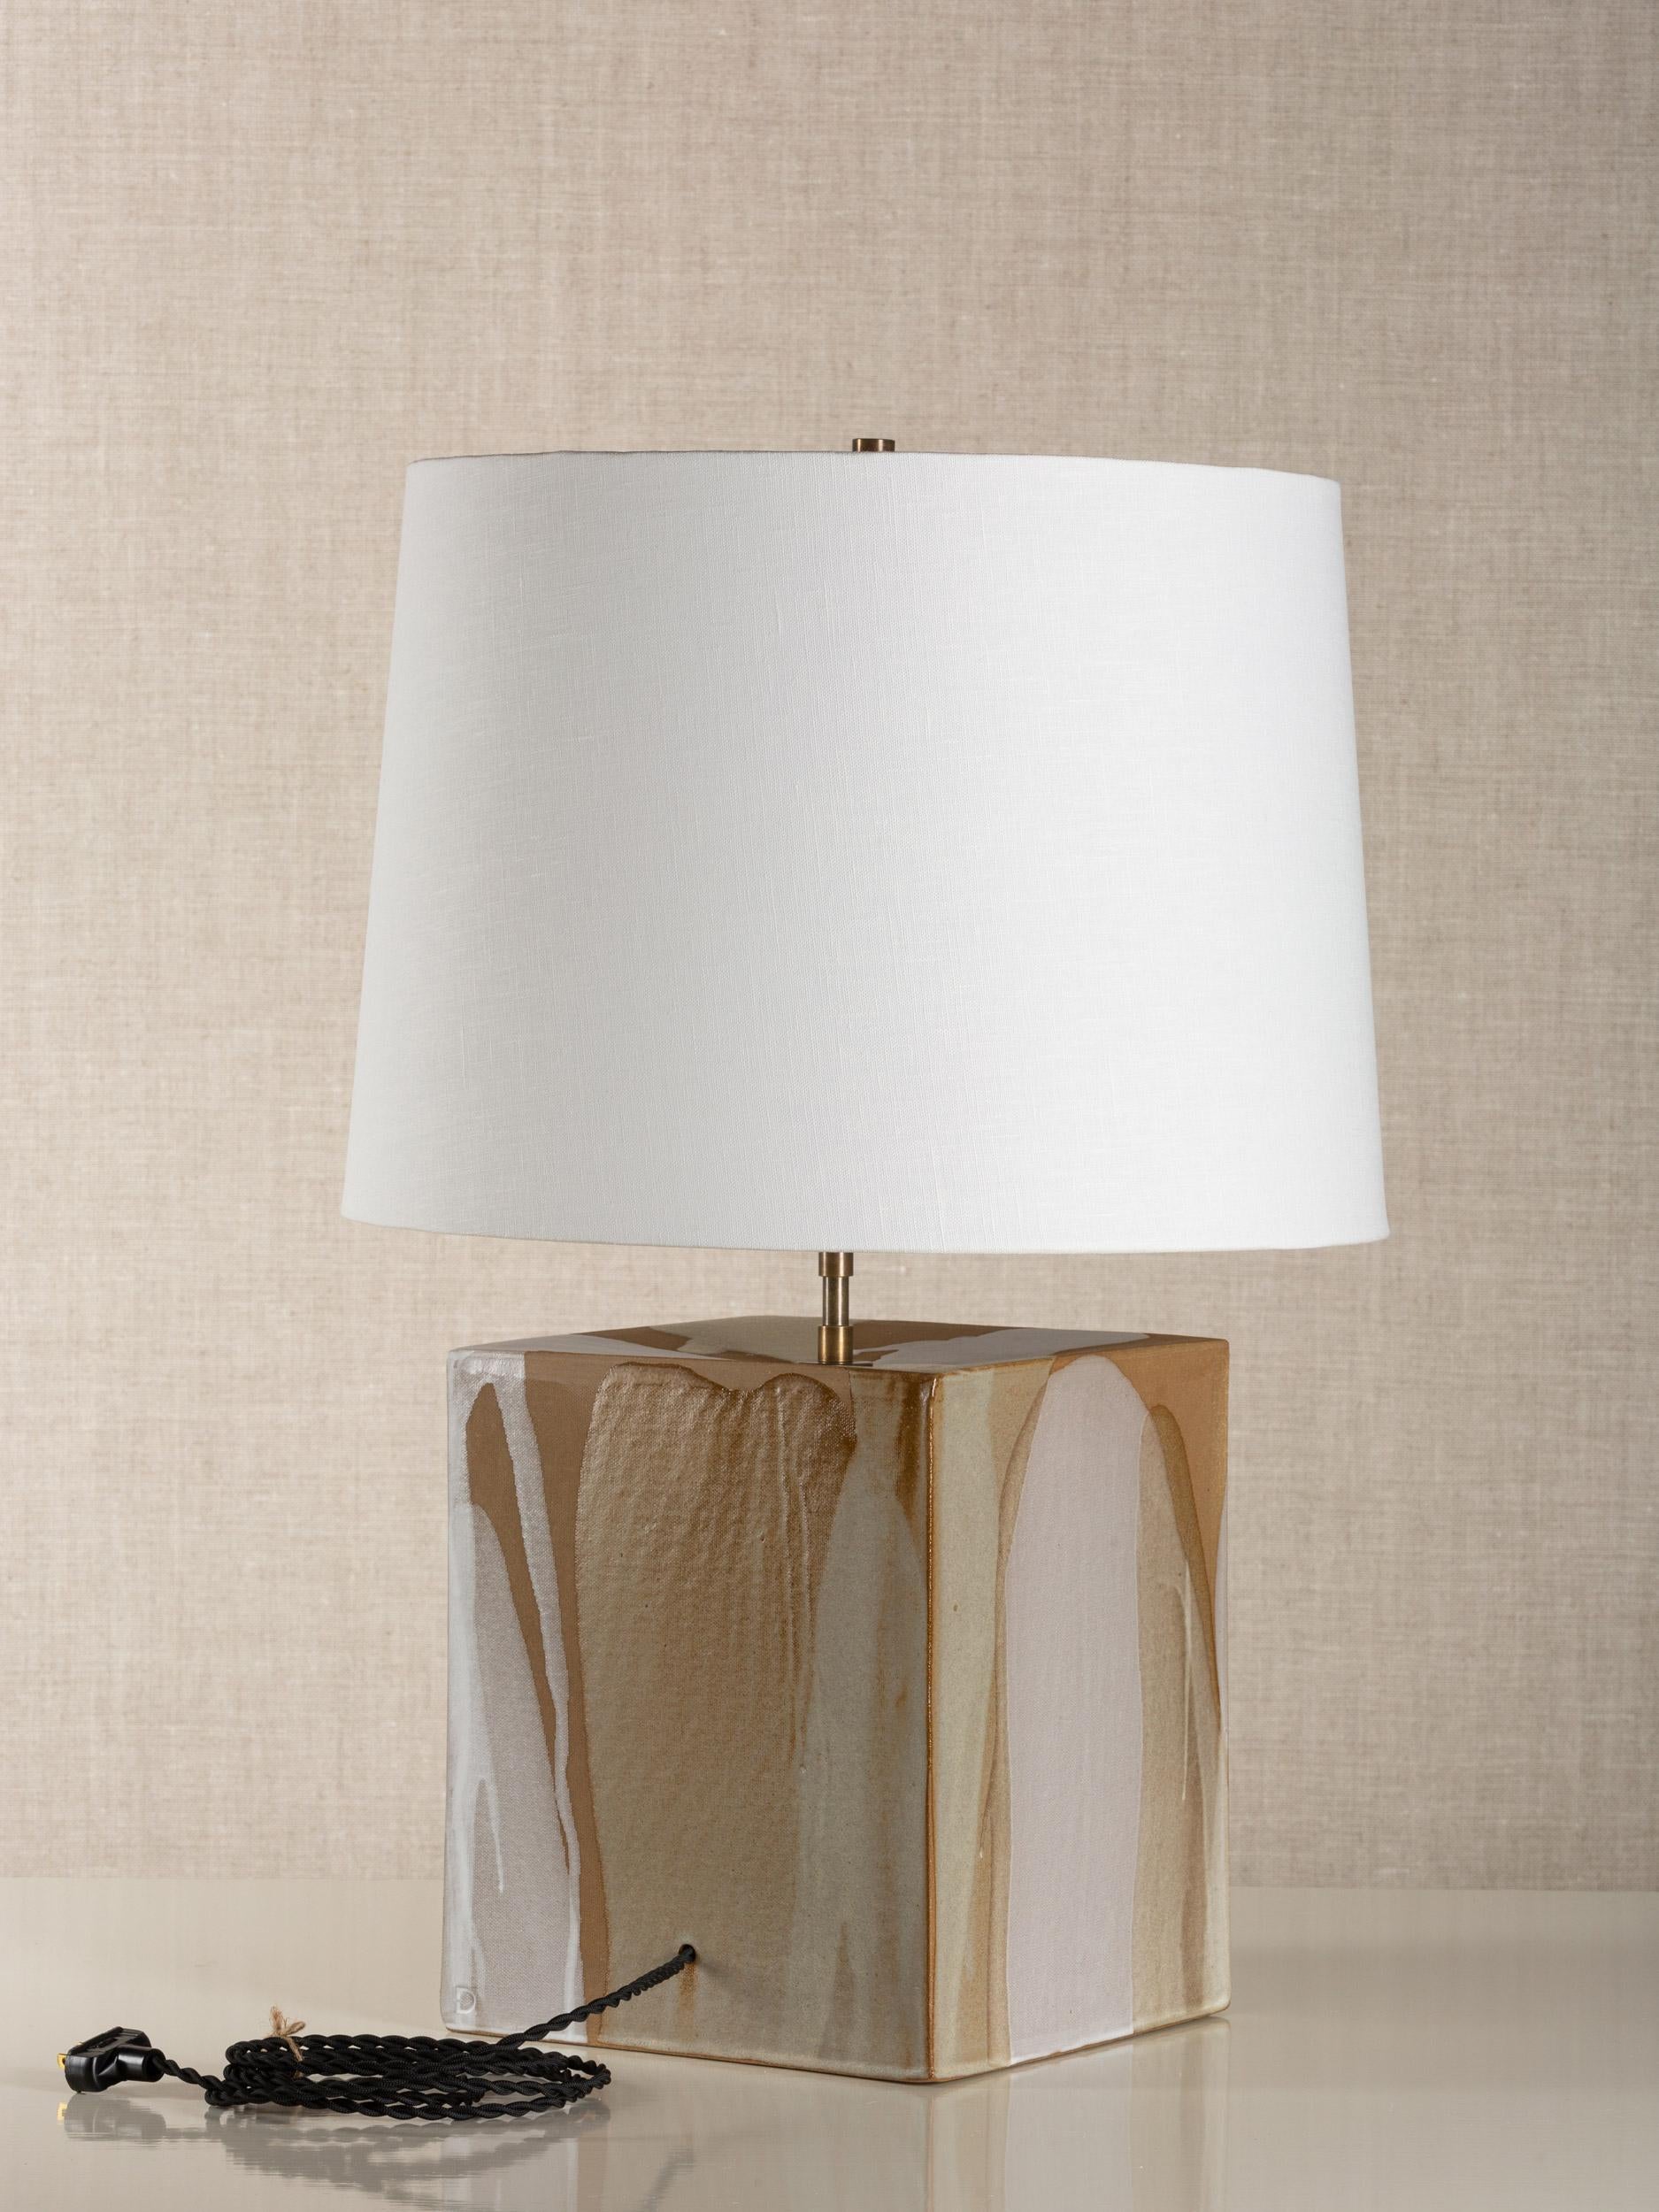 Our stoneware Washington Lamp is handcrafted using slab-construction techniques.

Finish

- Chalk and ochre poured glaze
- Antique brass fittings
- Twisted black-cloth cord
- Full-range dimmer socket
- Off-white linen or paper